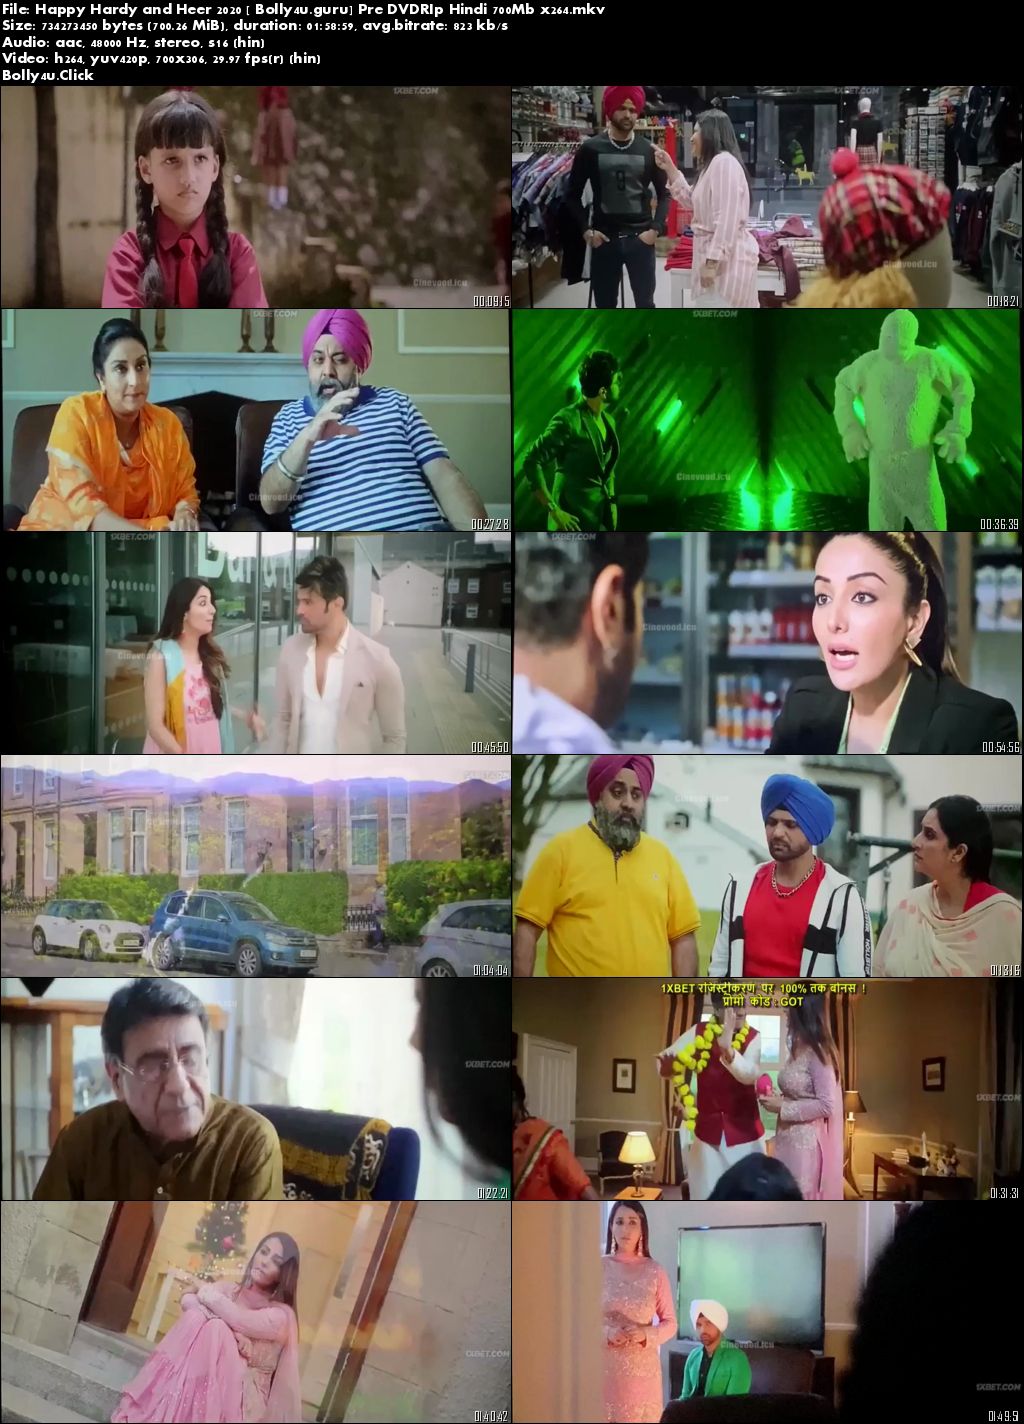 Happy Hardy and Heer 2020 Pre DVDRip 300Mb Hindi 480p Download